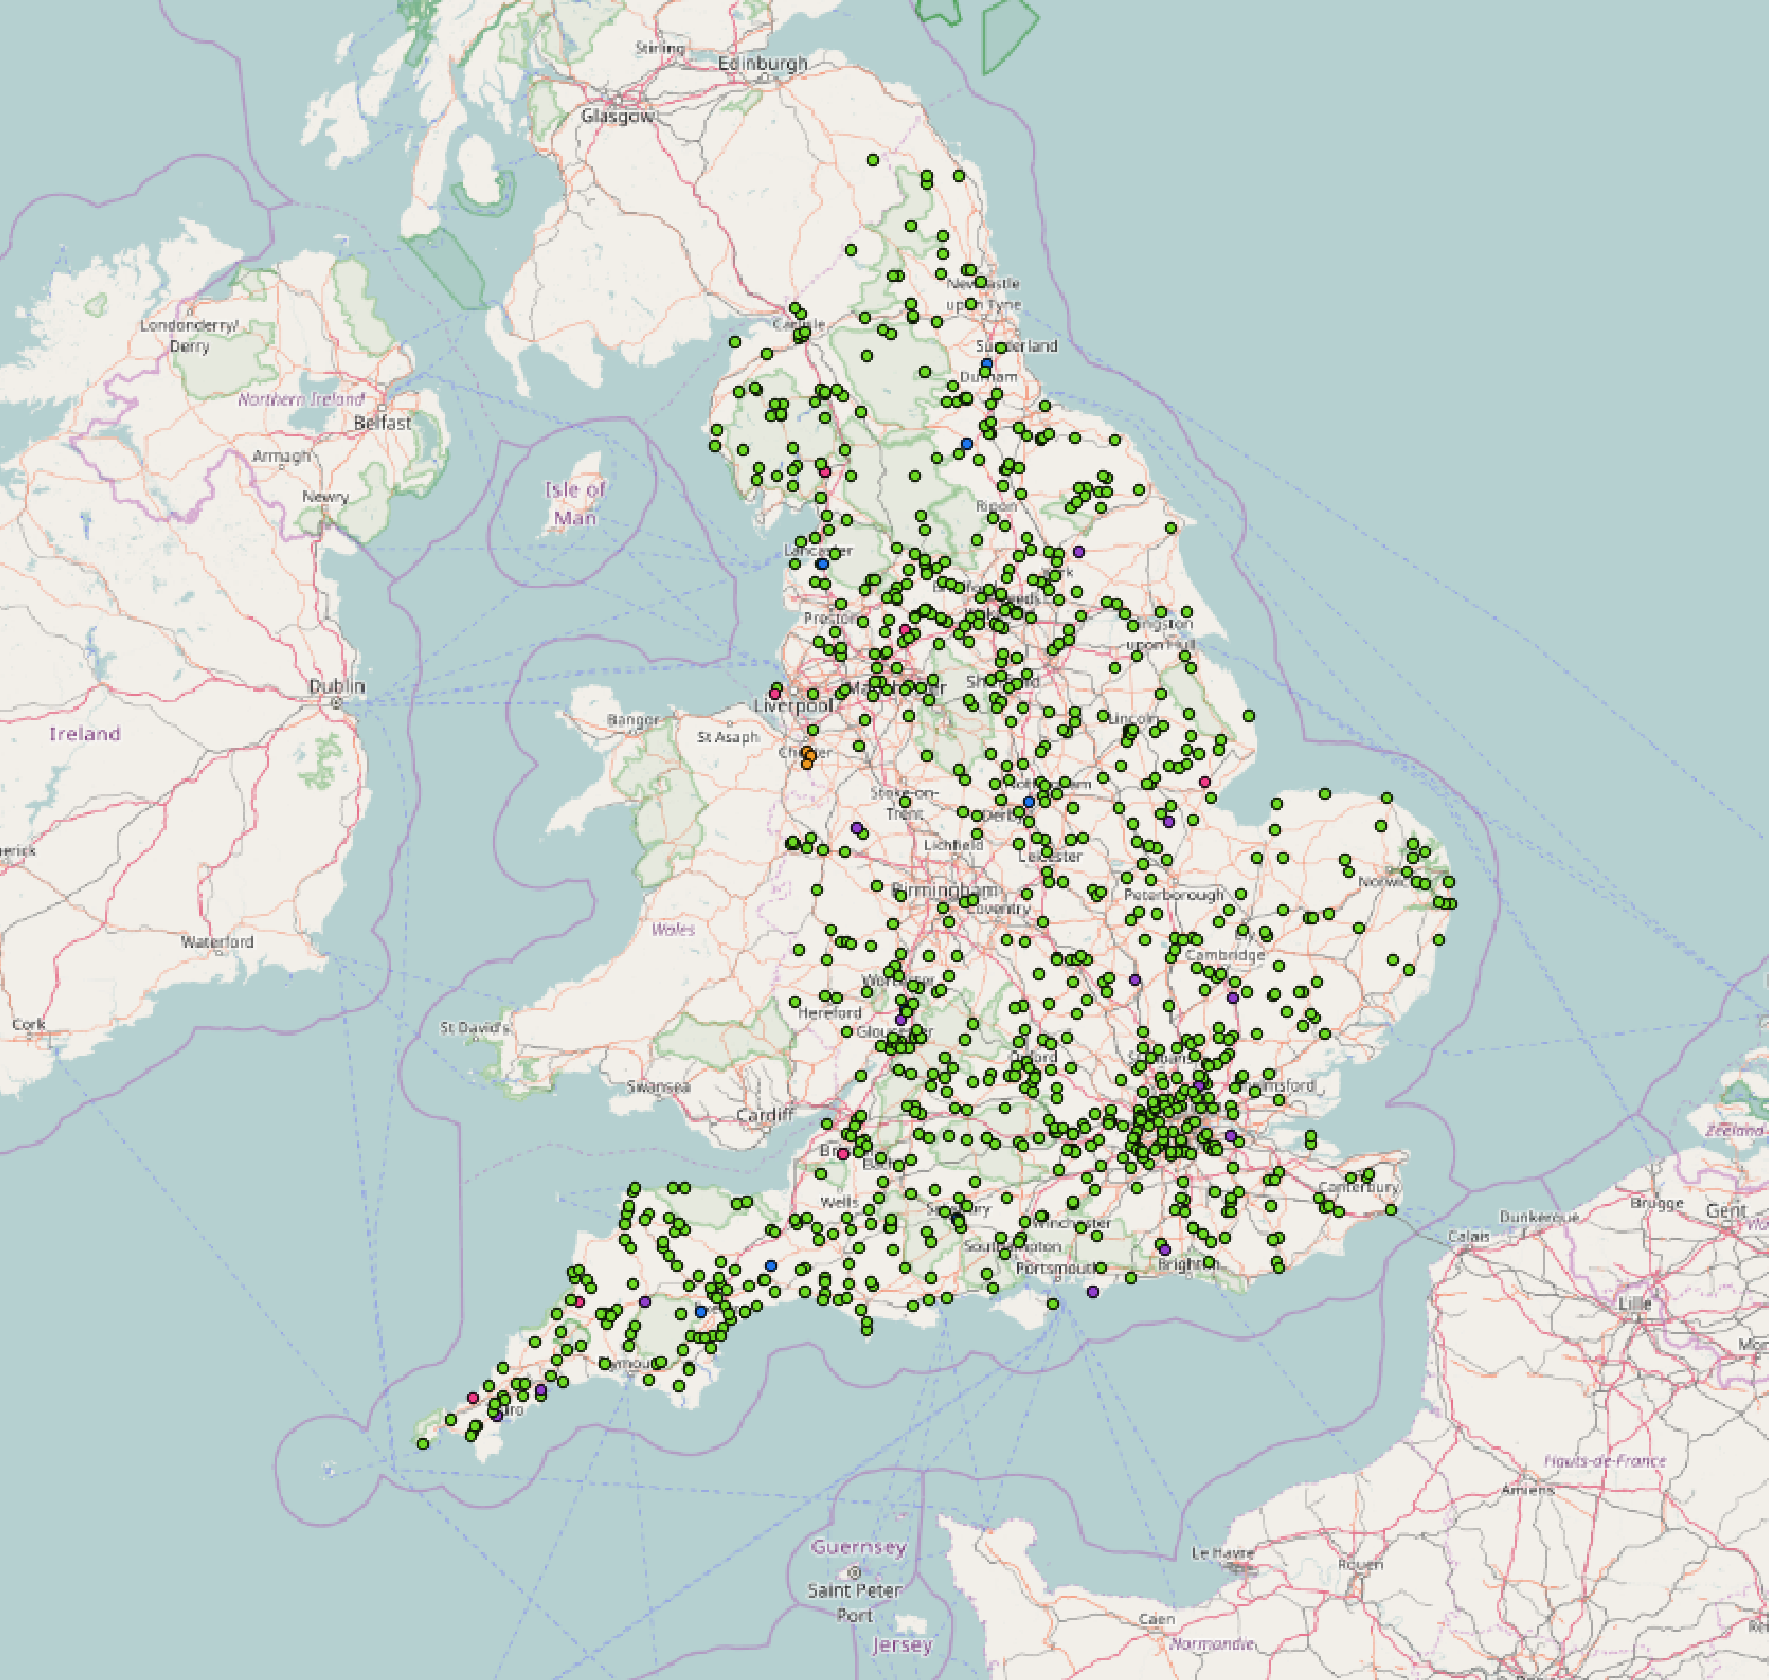 A map of the UK with coloured dots on it representing flood monitoring data stations